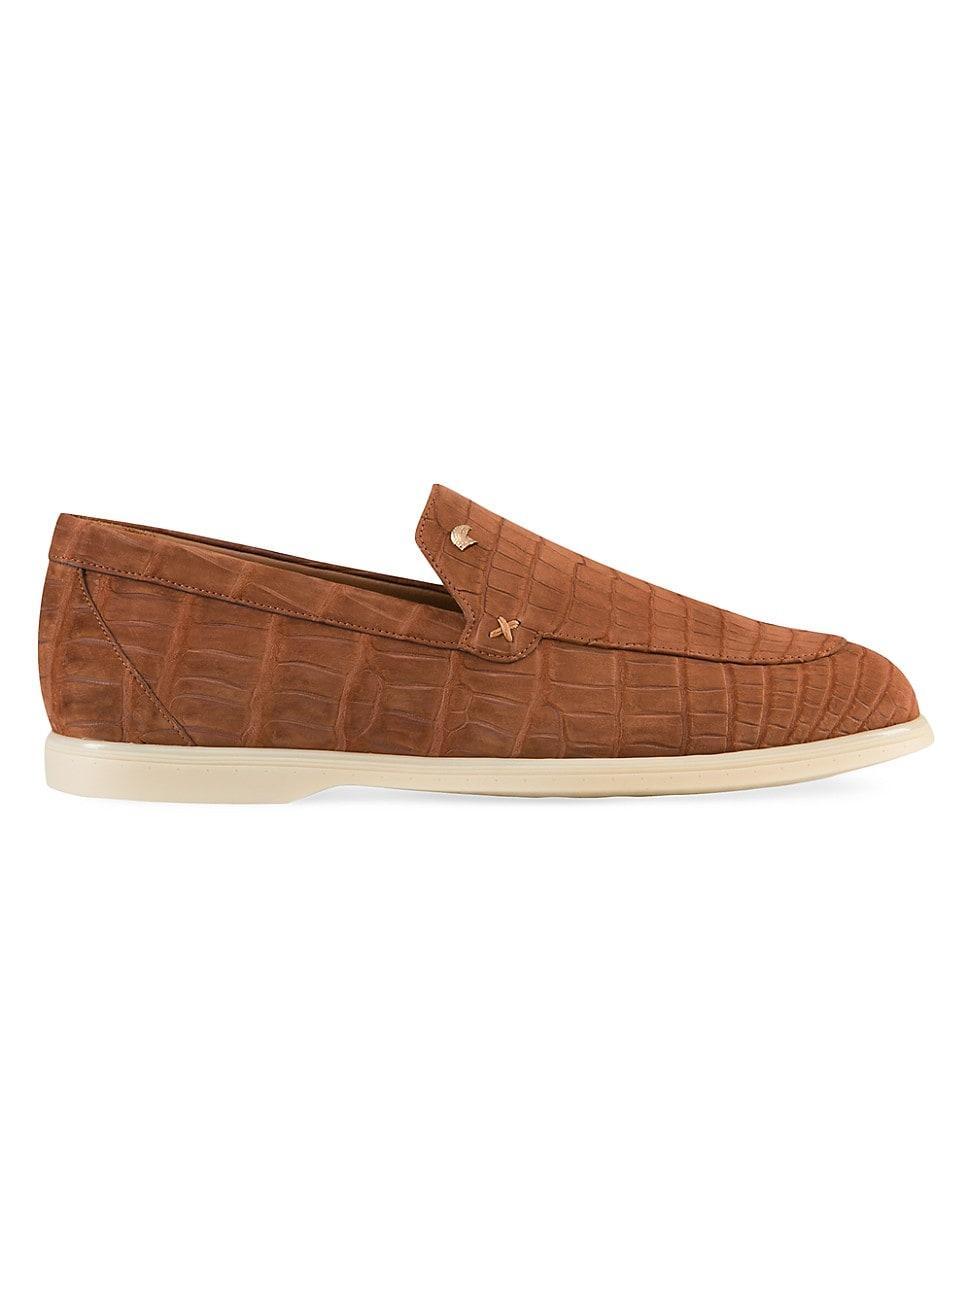 Beamon Suede Loafers Product Image